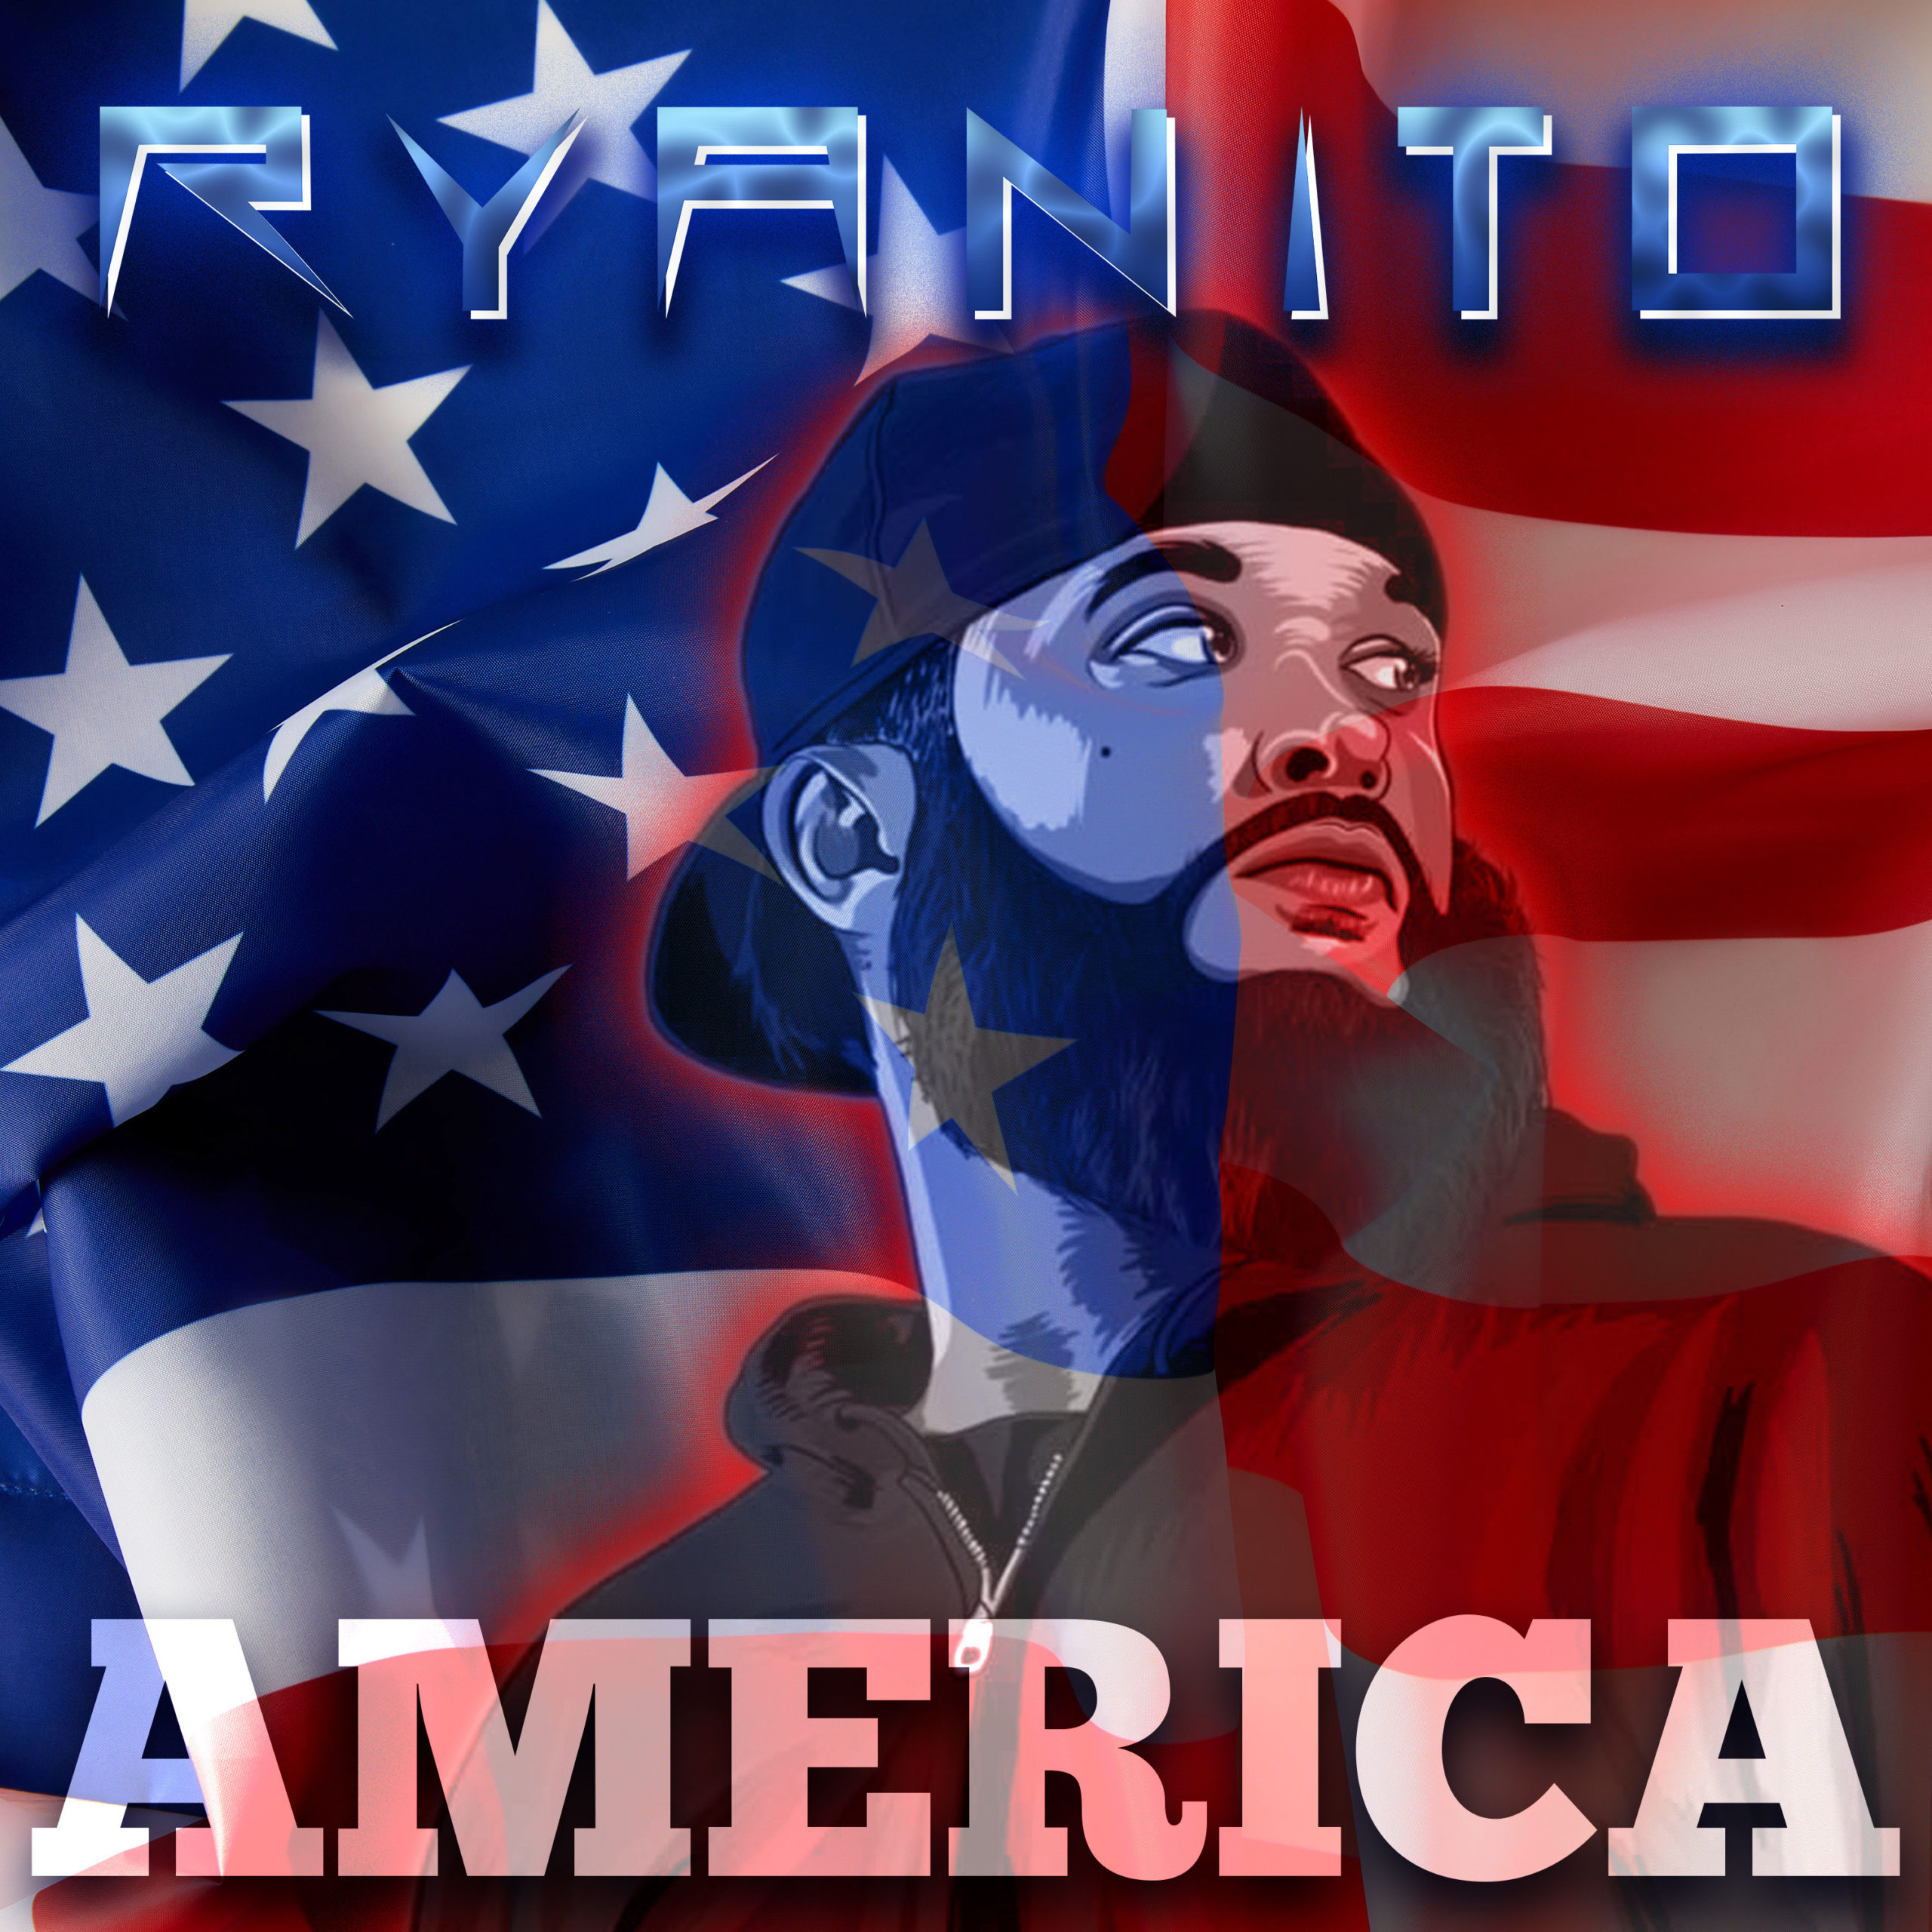 Rapper Ryanito Releases new single “America” with exclusive NFT Project